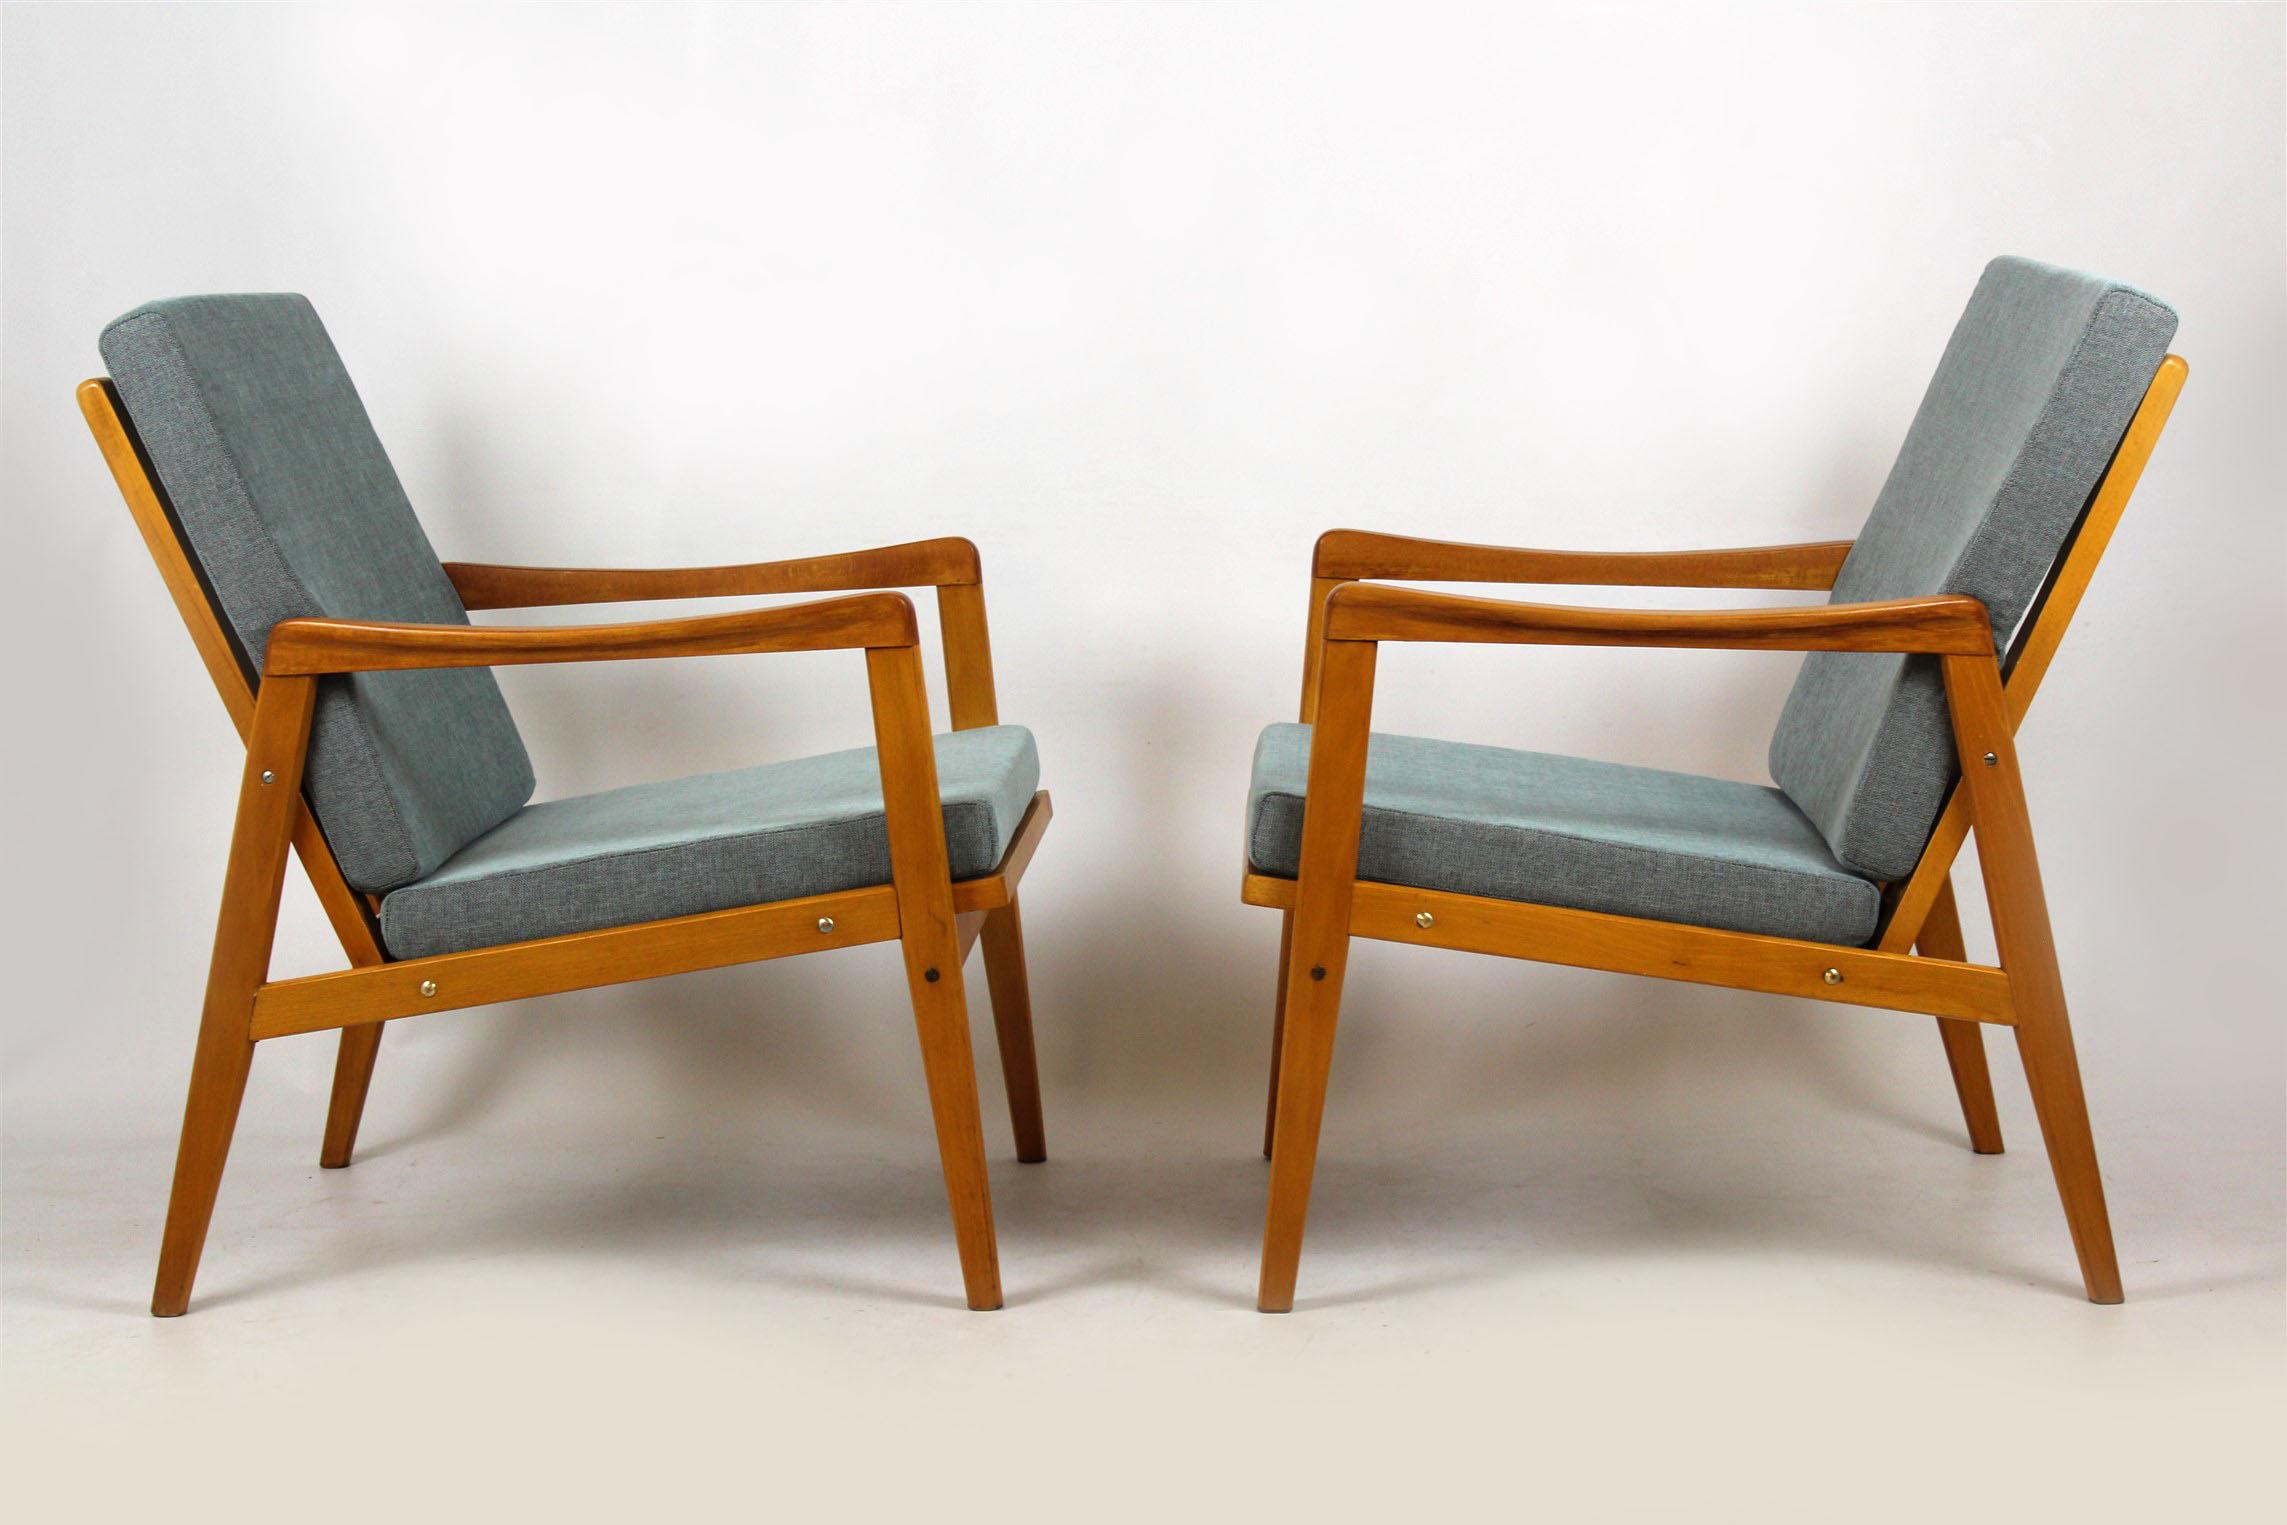 A pair of armchairs from the mid-1960s, made in former Czechoslovakia. 
New pillows upholstered with new fabric. Woodwork kept in original, good condition.